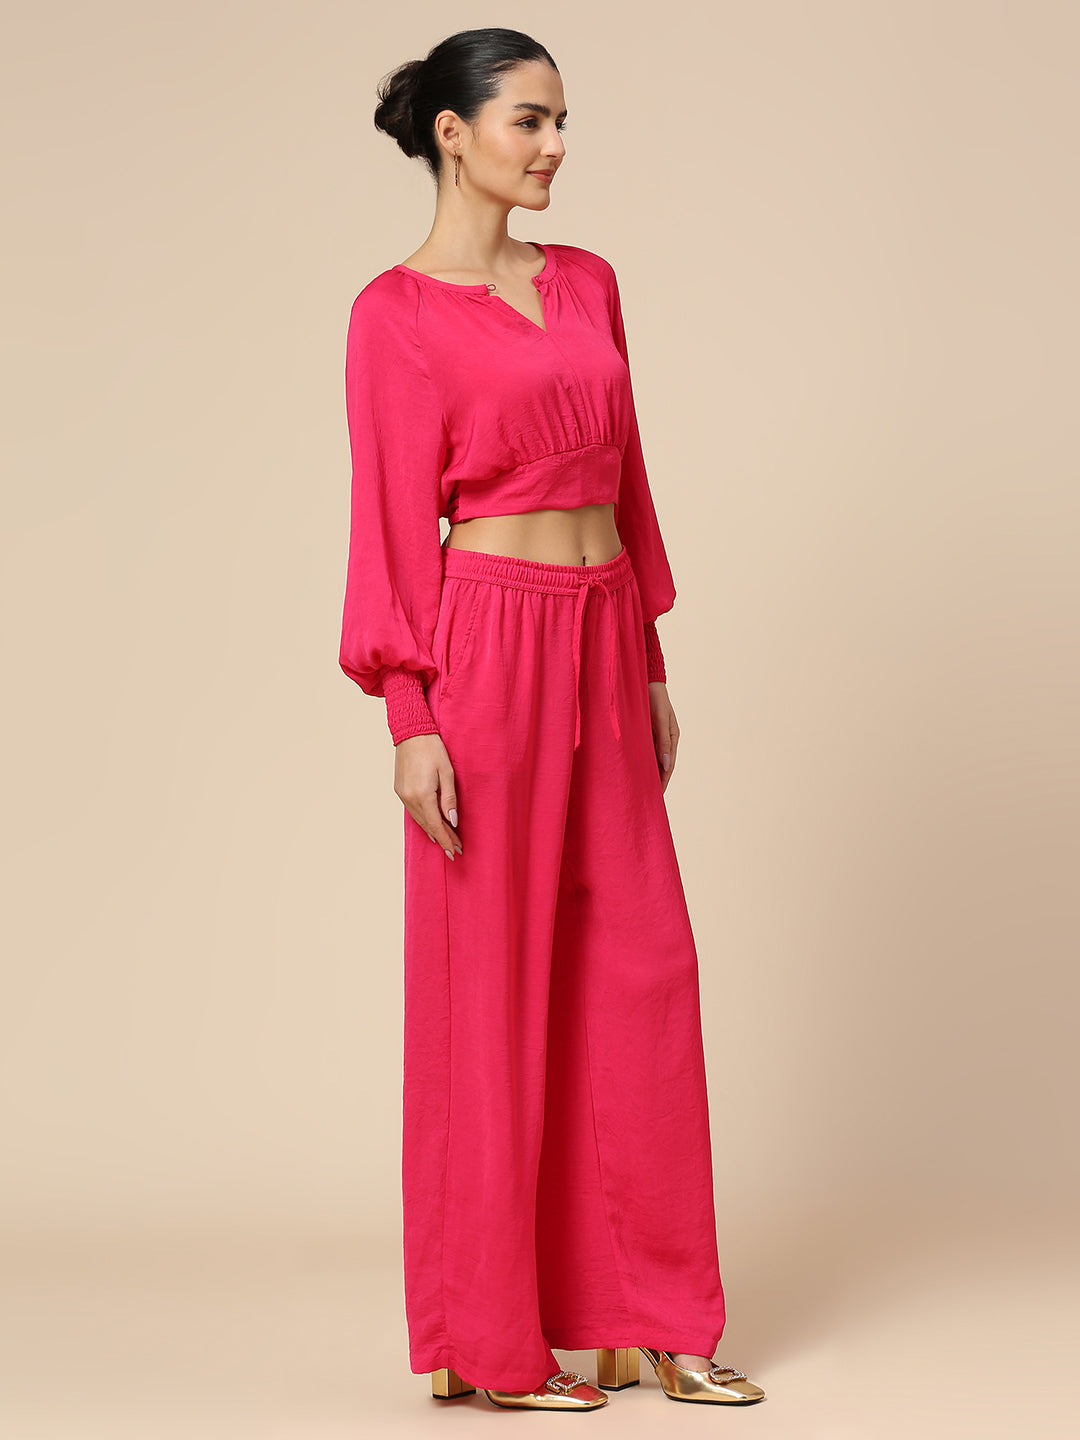 CRUSHED POLY CO-ORD SET WITH ROMANTIC SLEEVED CROP TOP & FLUID PULL ON PANTS